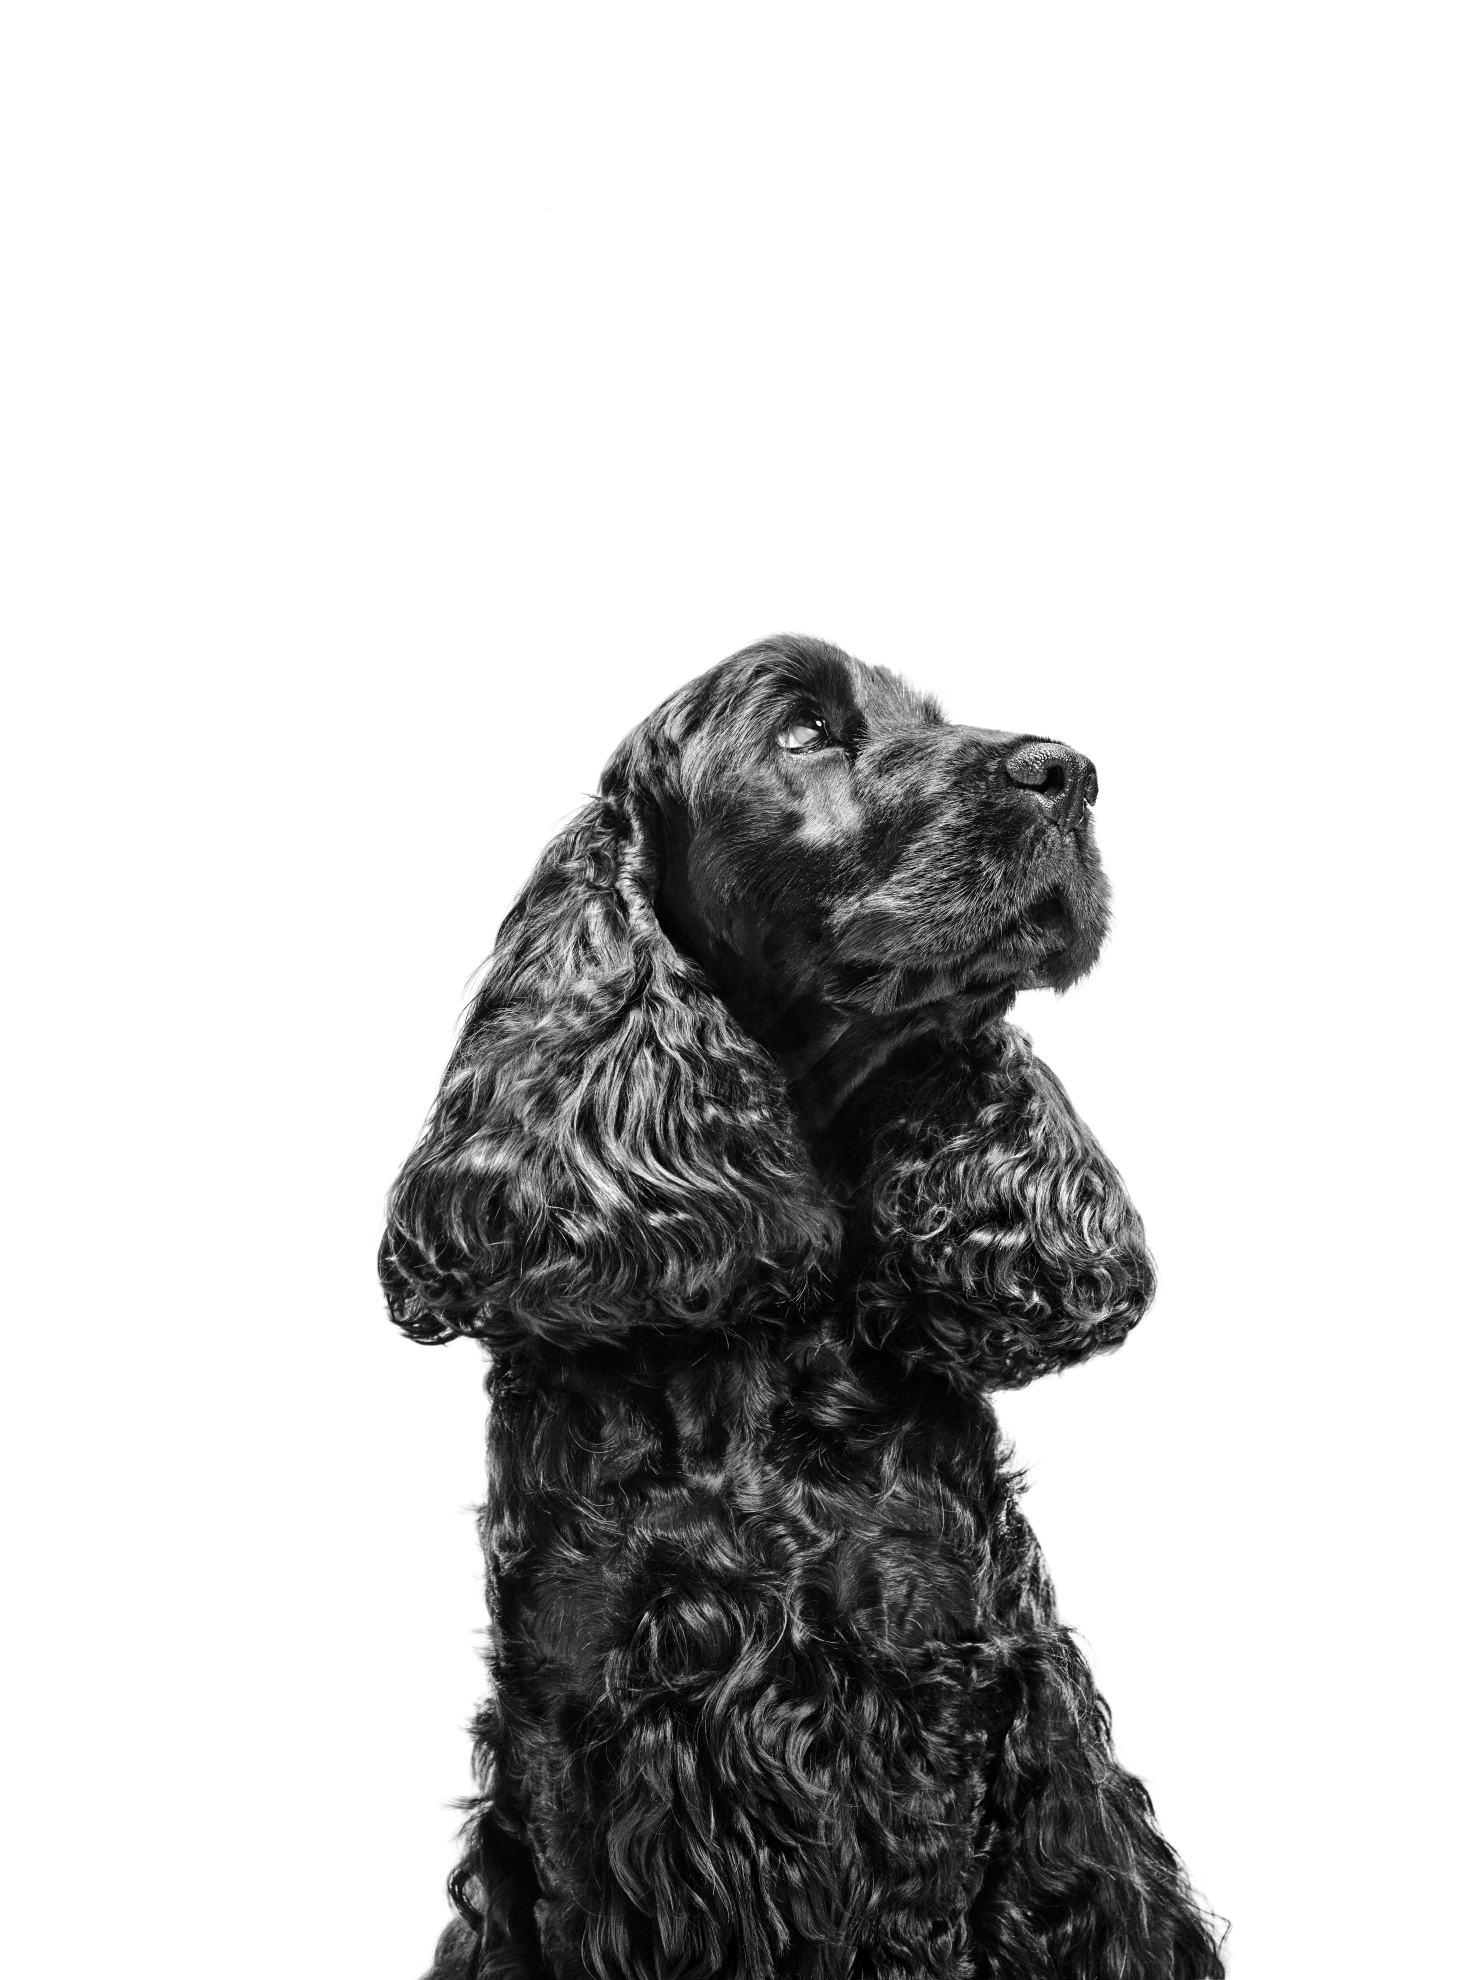 English Cocker Spaniel adult sitting in black and white on a white background